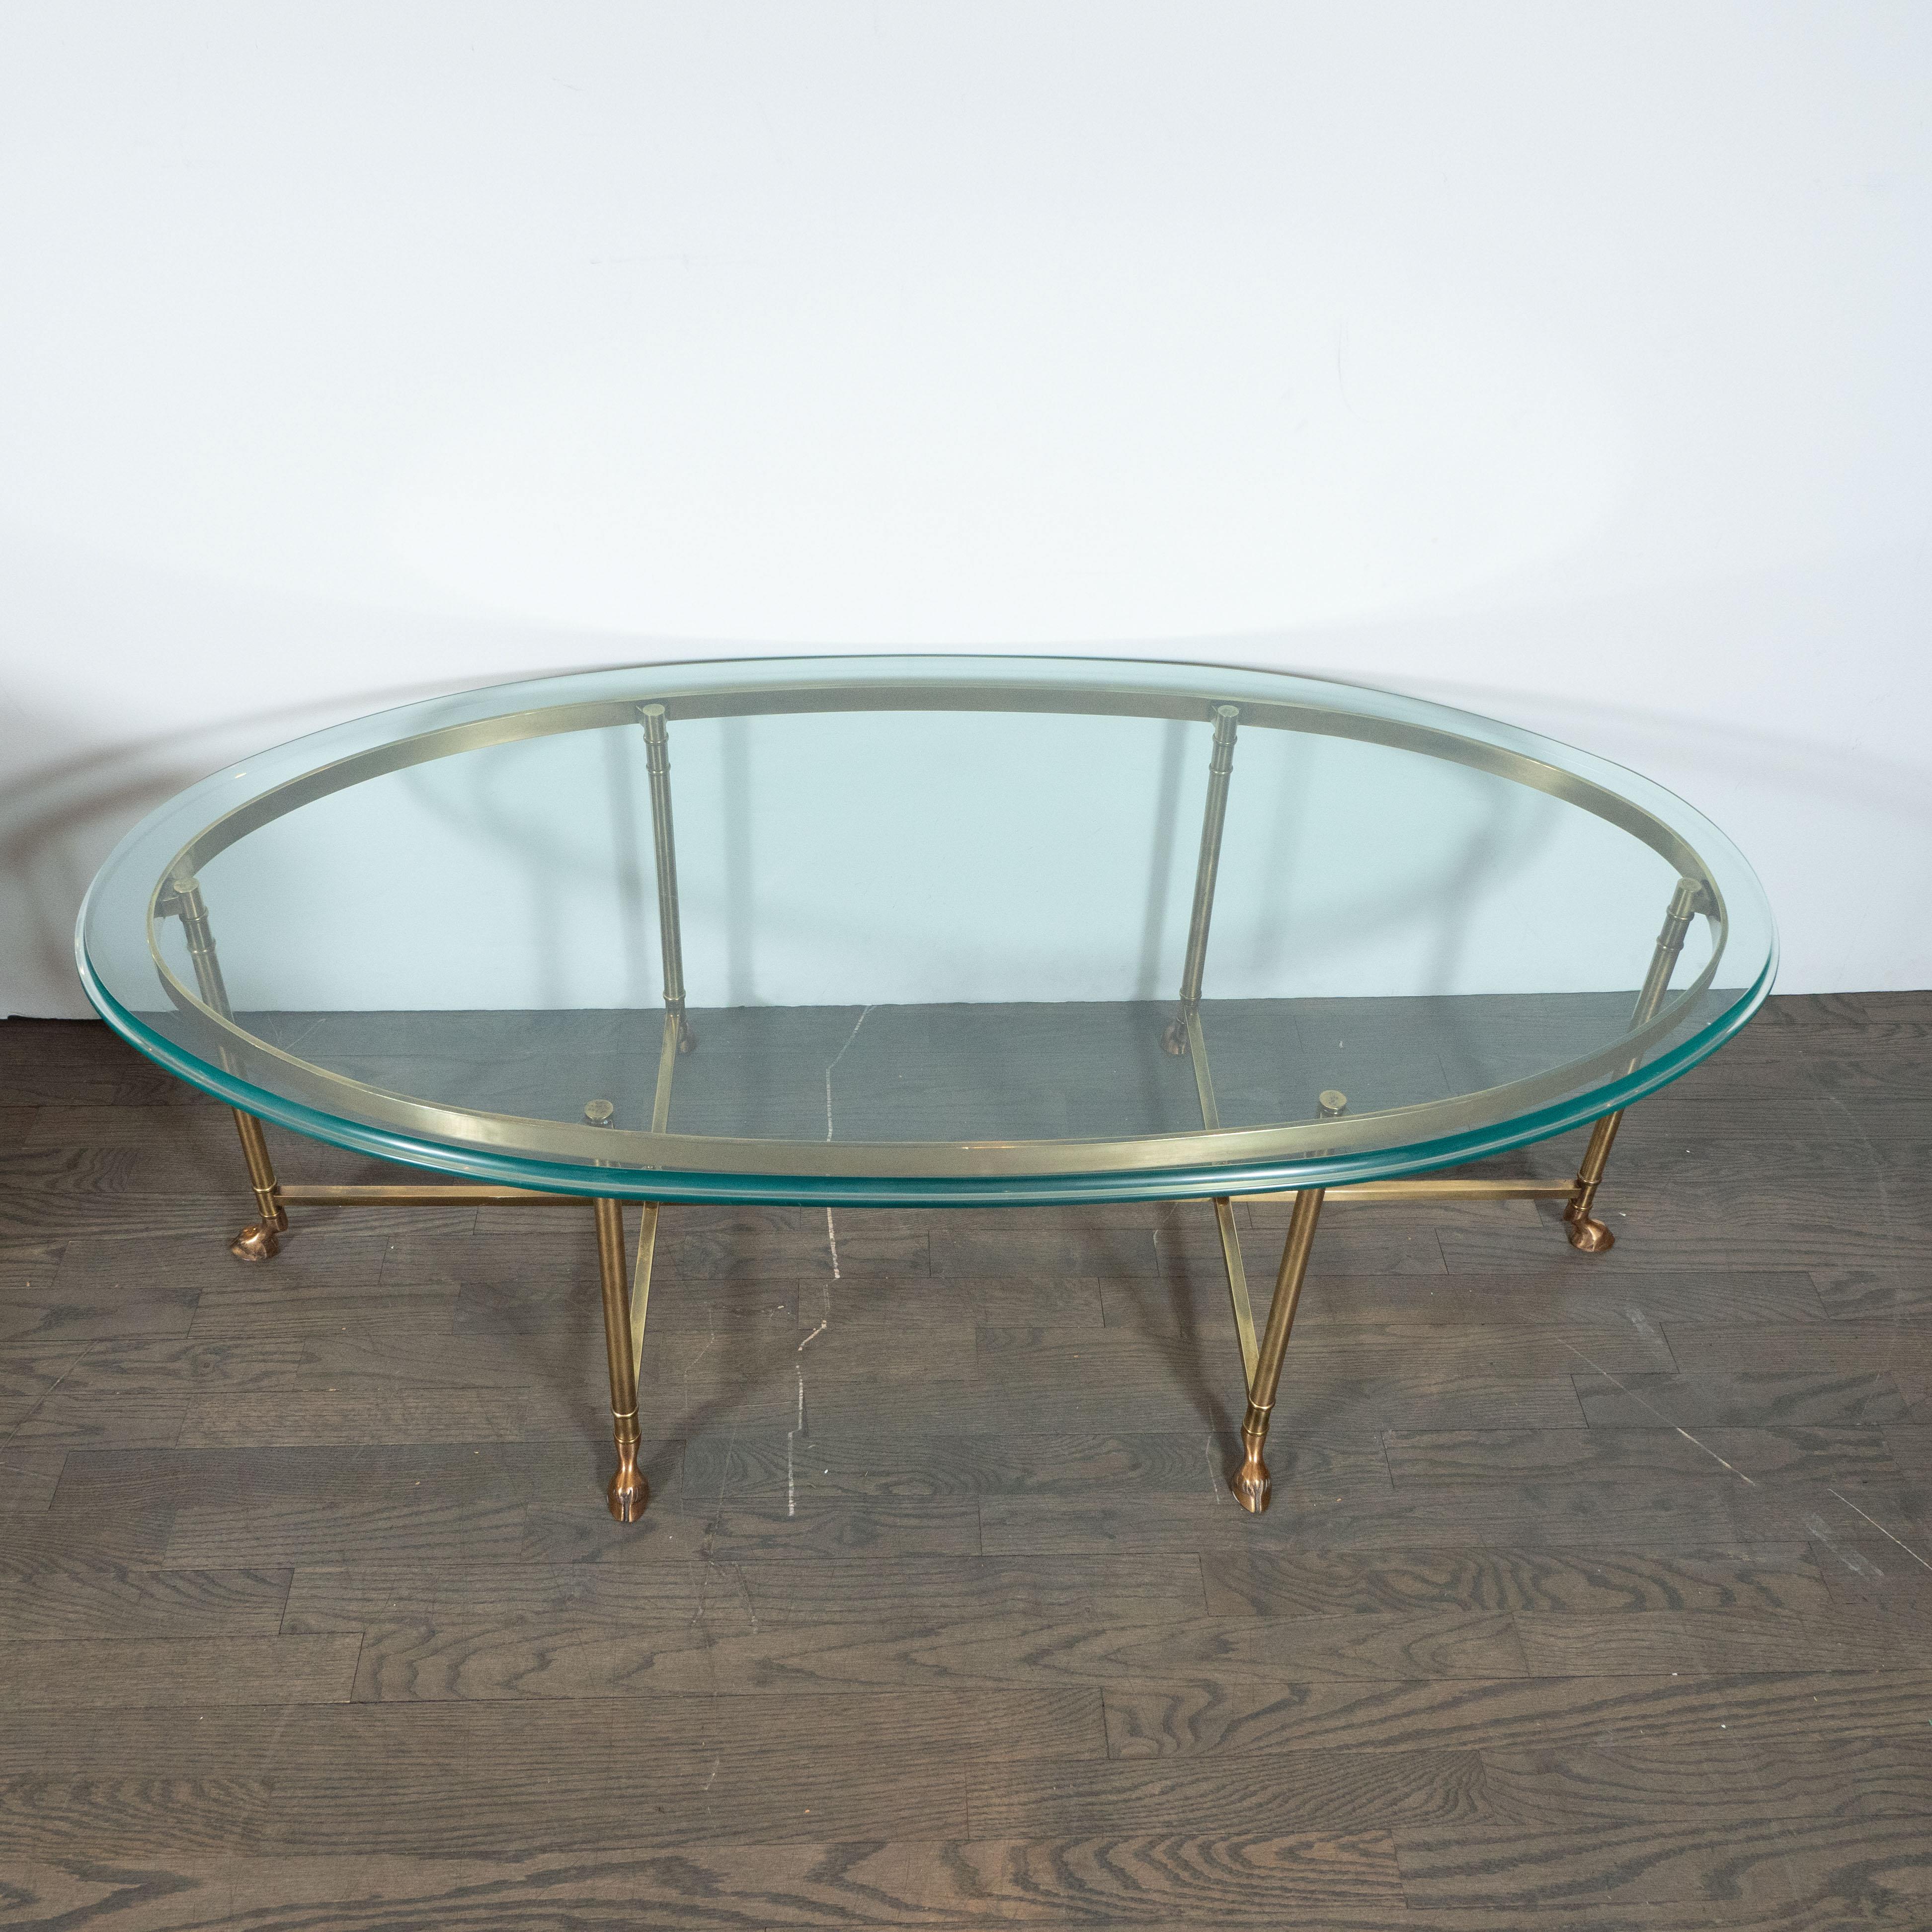 American Mid-Century Modern Brass and Beveled Glass Cocktail Table in the Style of Jansen